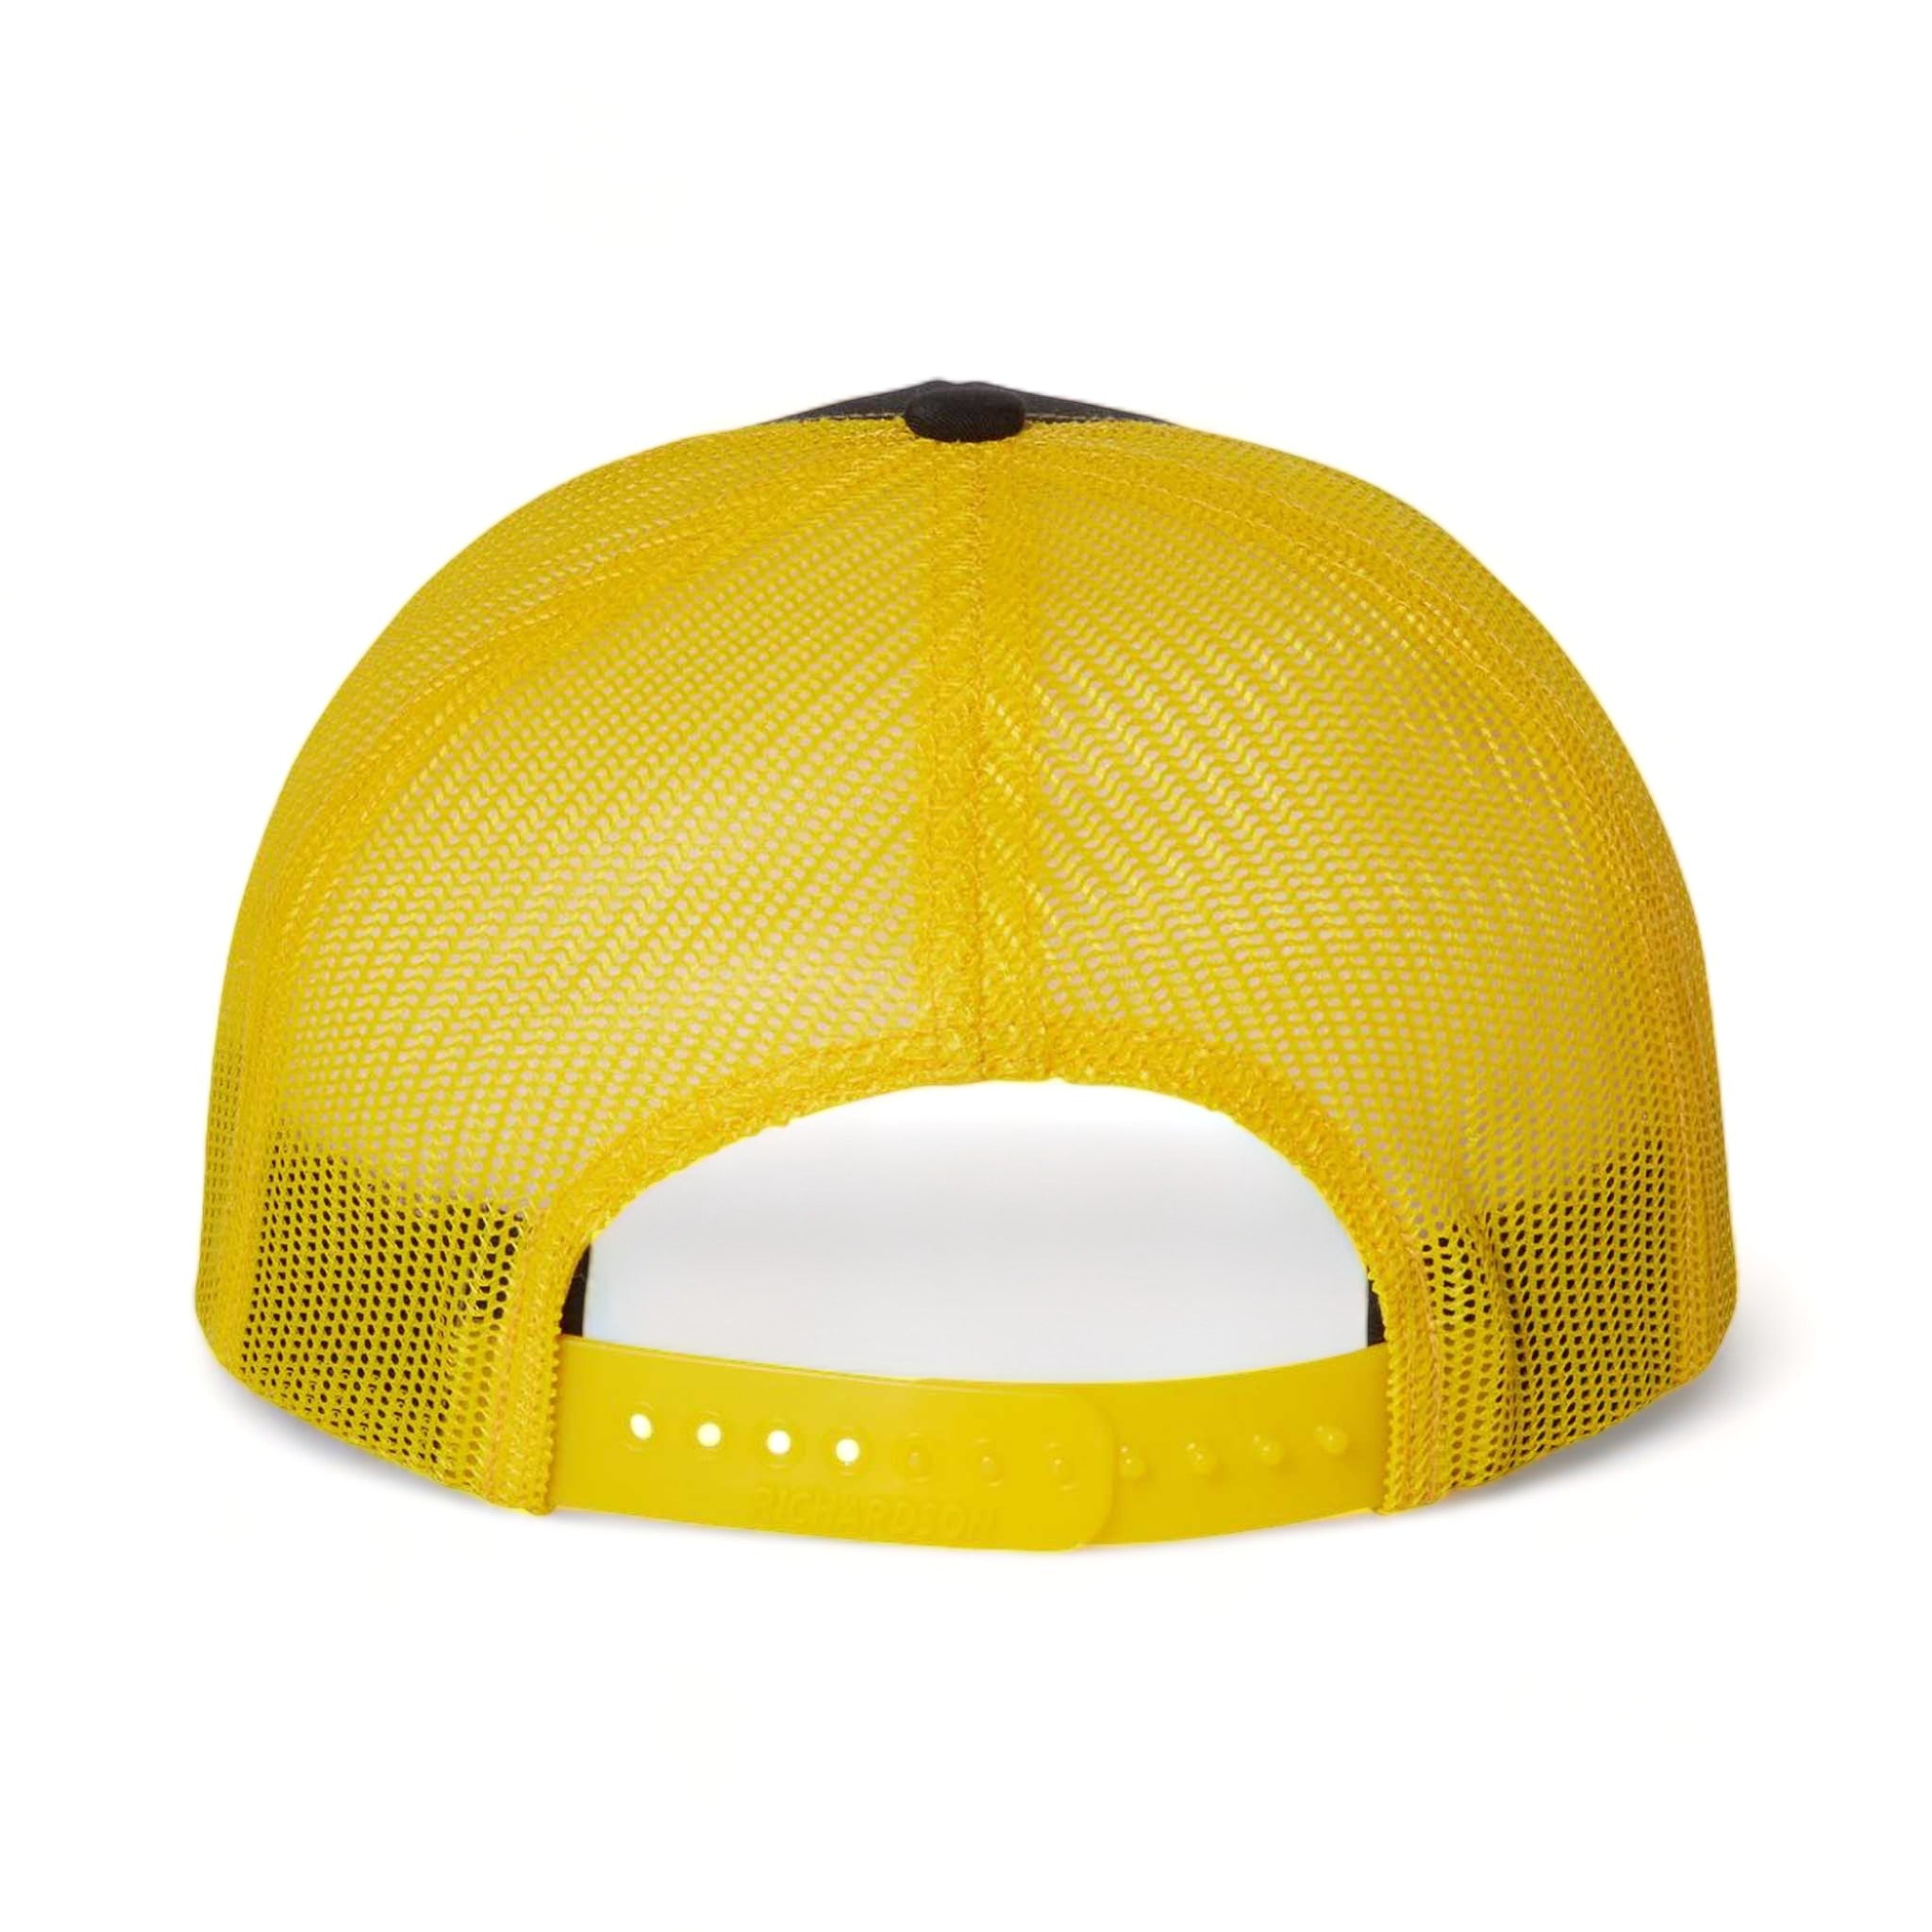 Back view of Richardson 112 custom hat in black and yellow